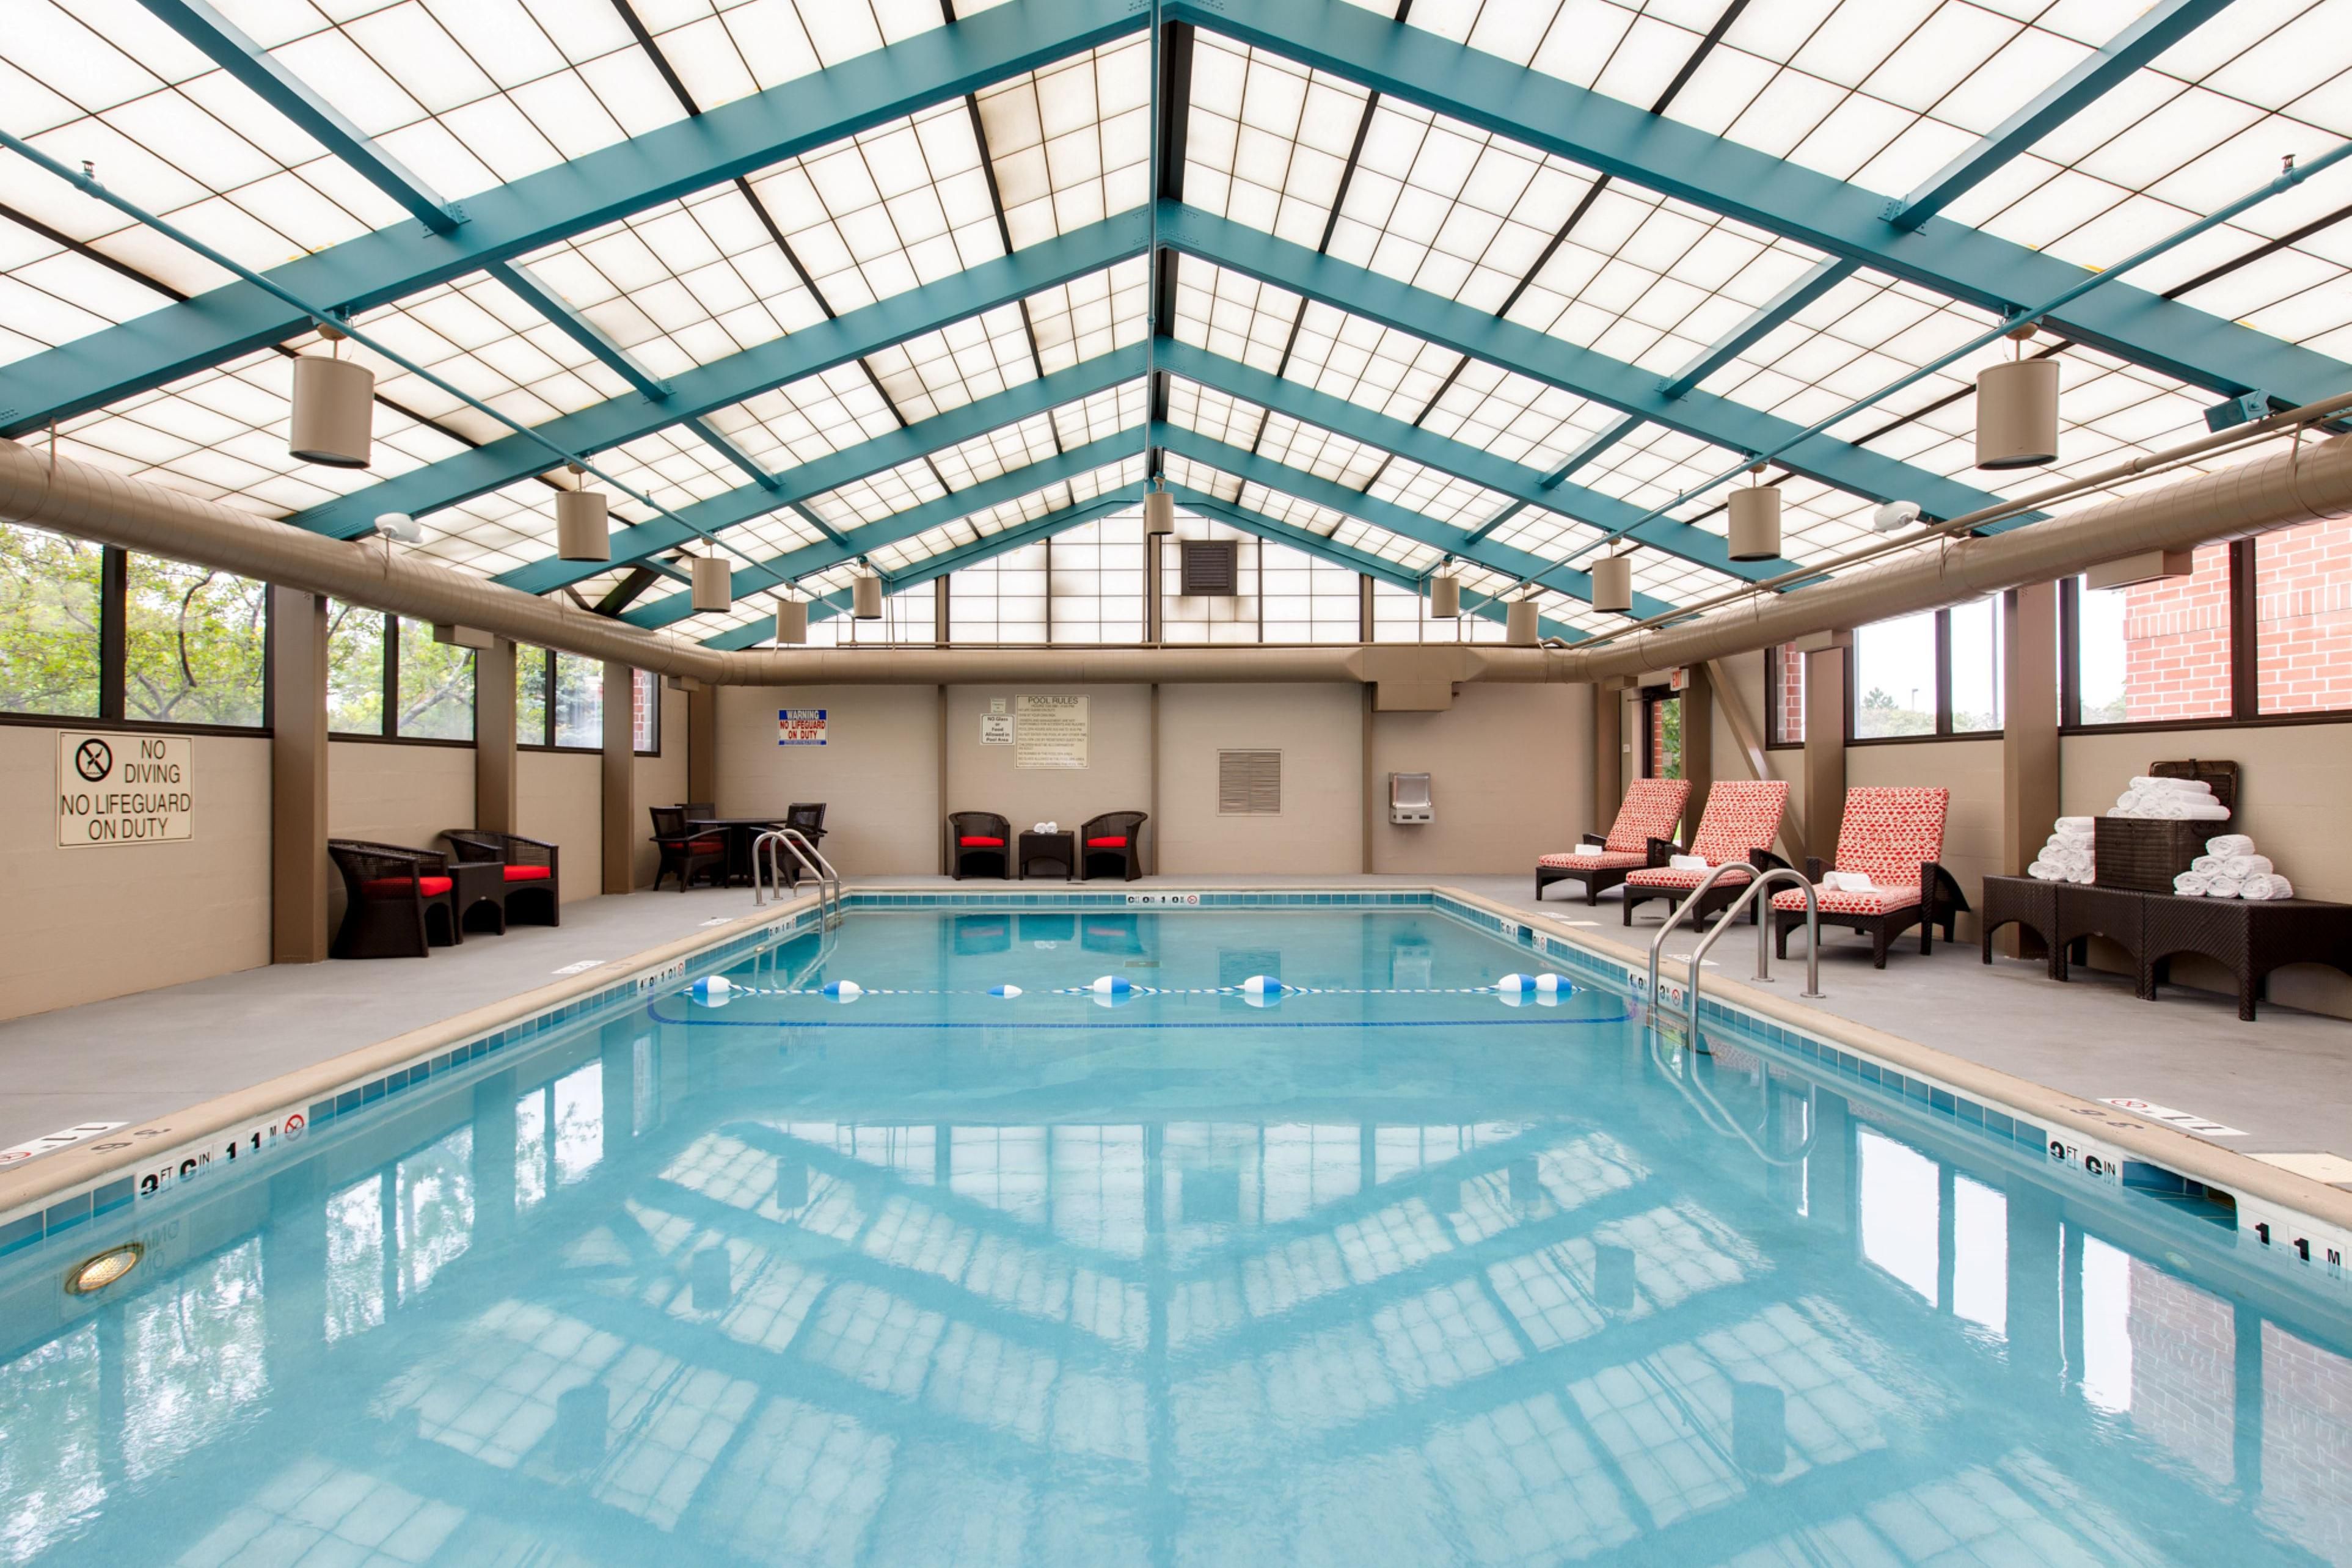 Relax and unwind in our indoor pool after a long day of work or play. 